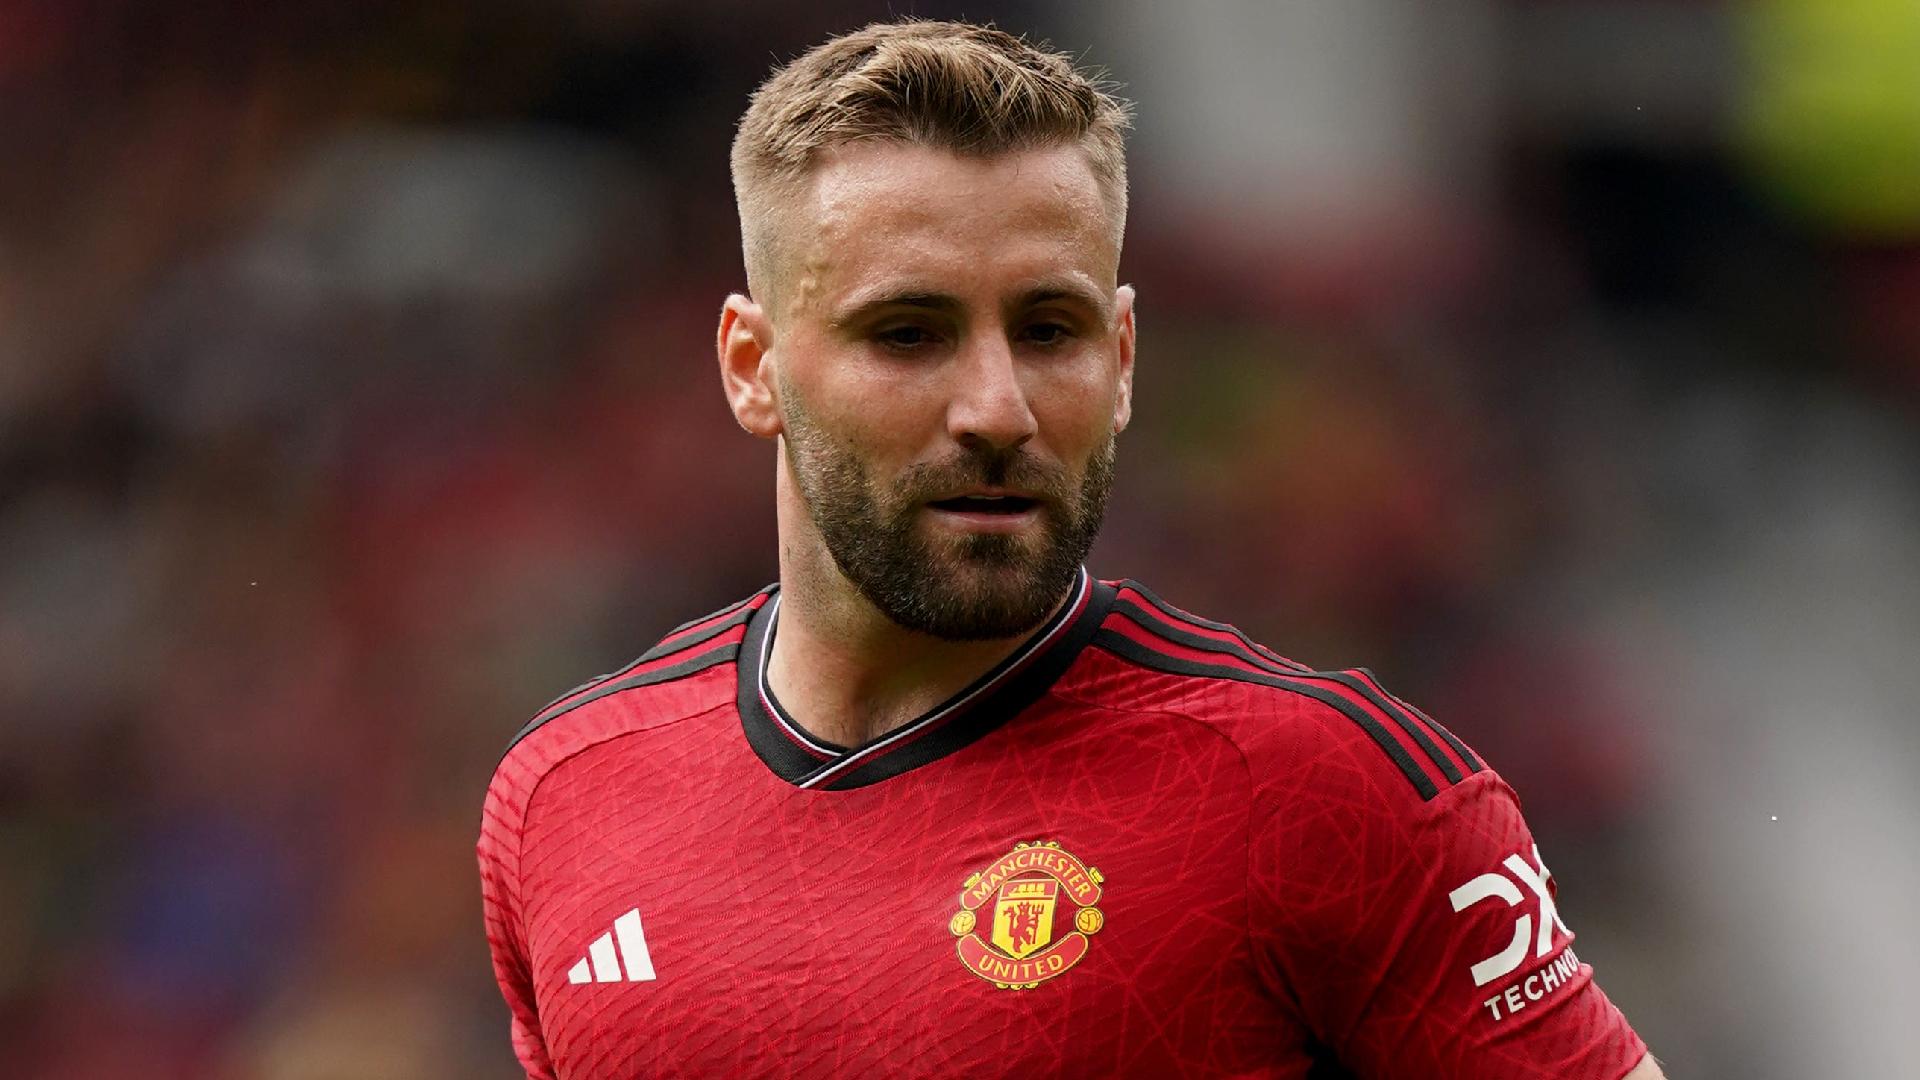 Manchester United and England left-back Luke Shaw sidelined by muscle injury